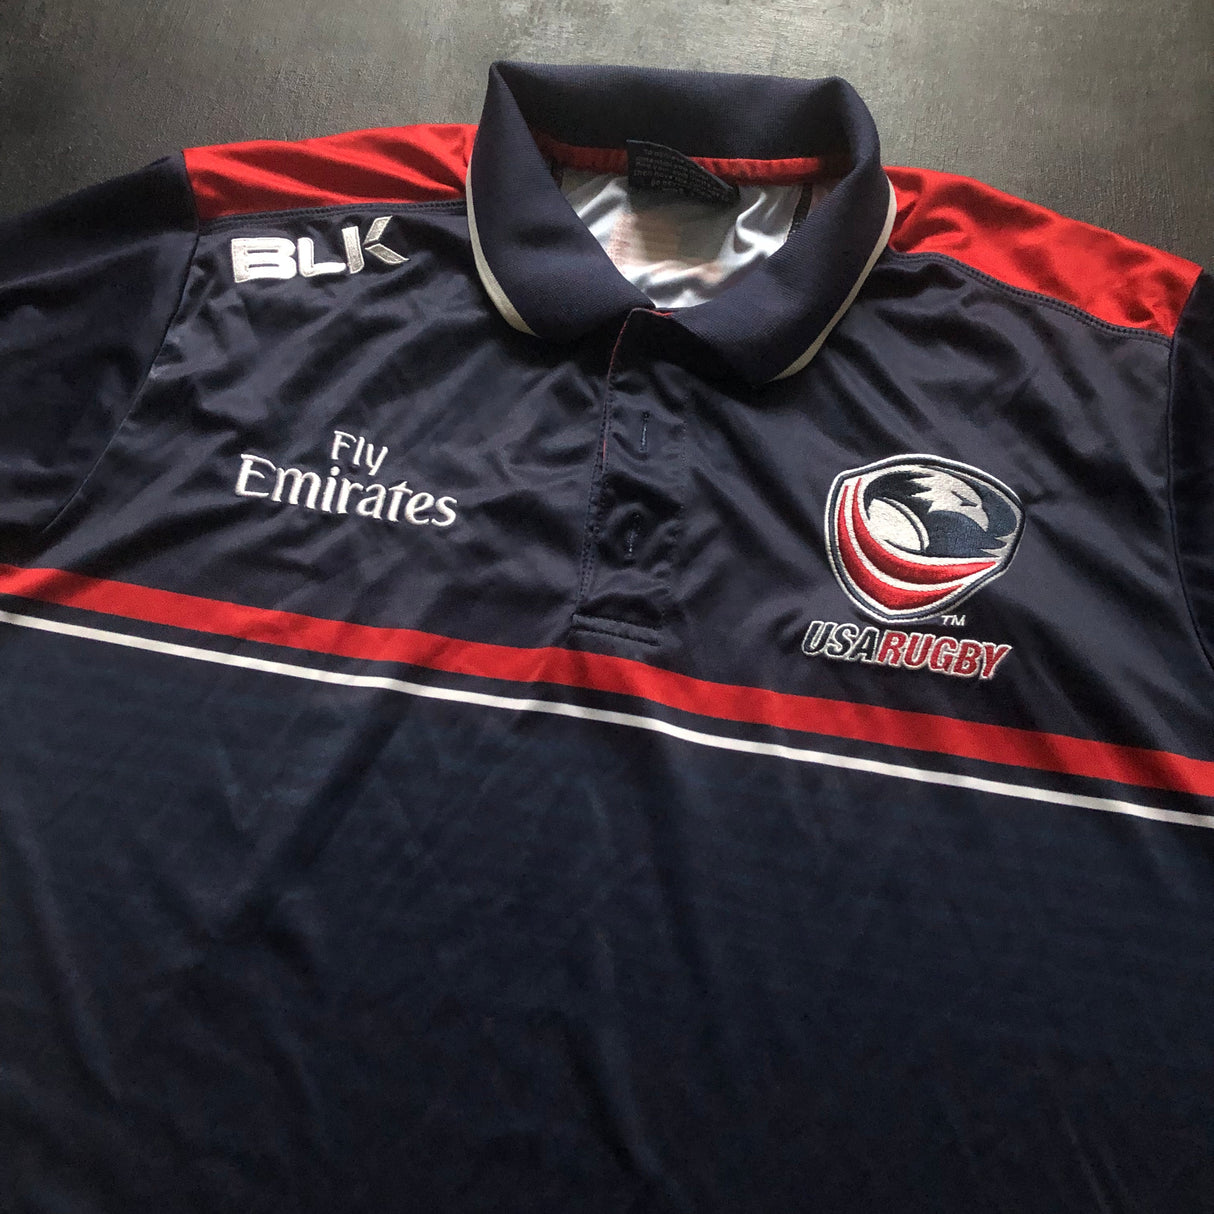 USA National Rugby Team Polo Large Underdog Rugby - The Tier 2 Rugby Shop 